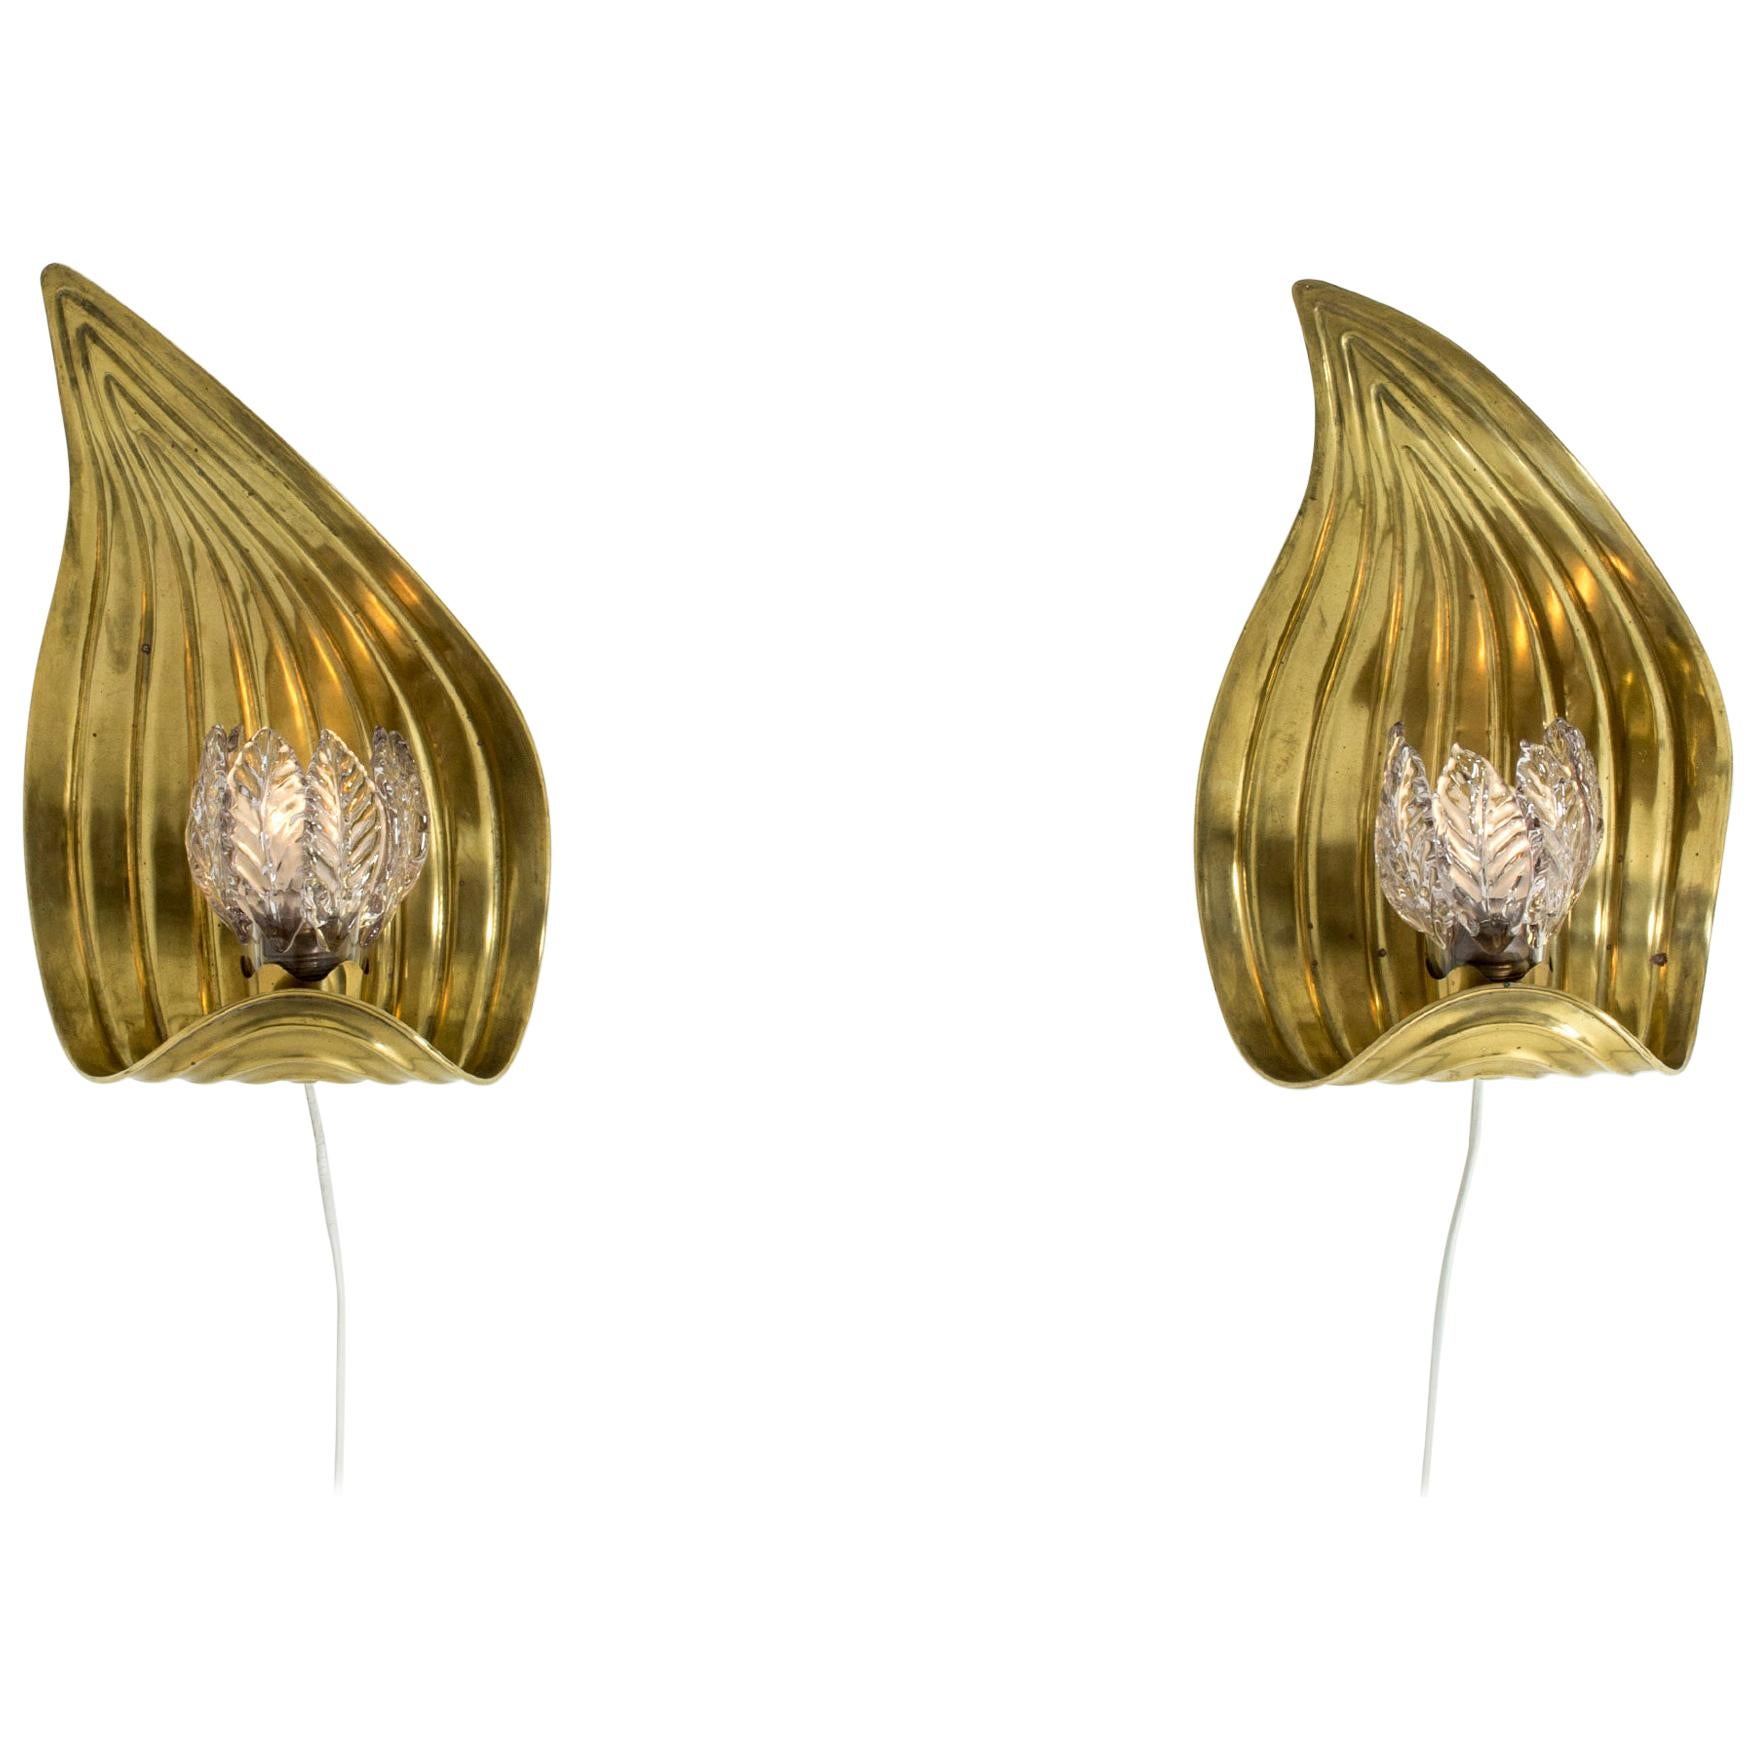 Pair of Glass and Brass Swedish Modern Wall Lights, 1940s